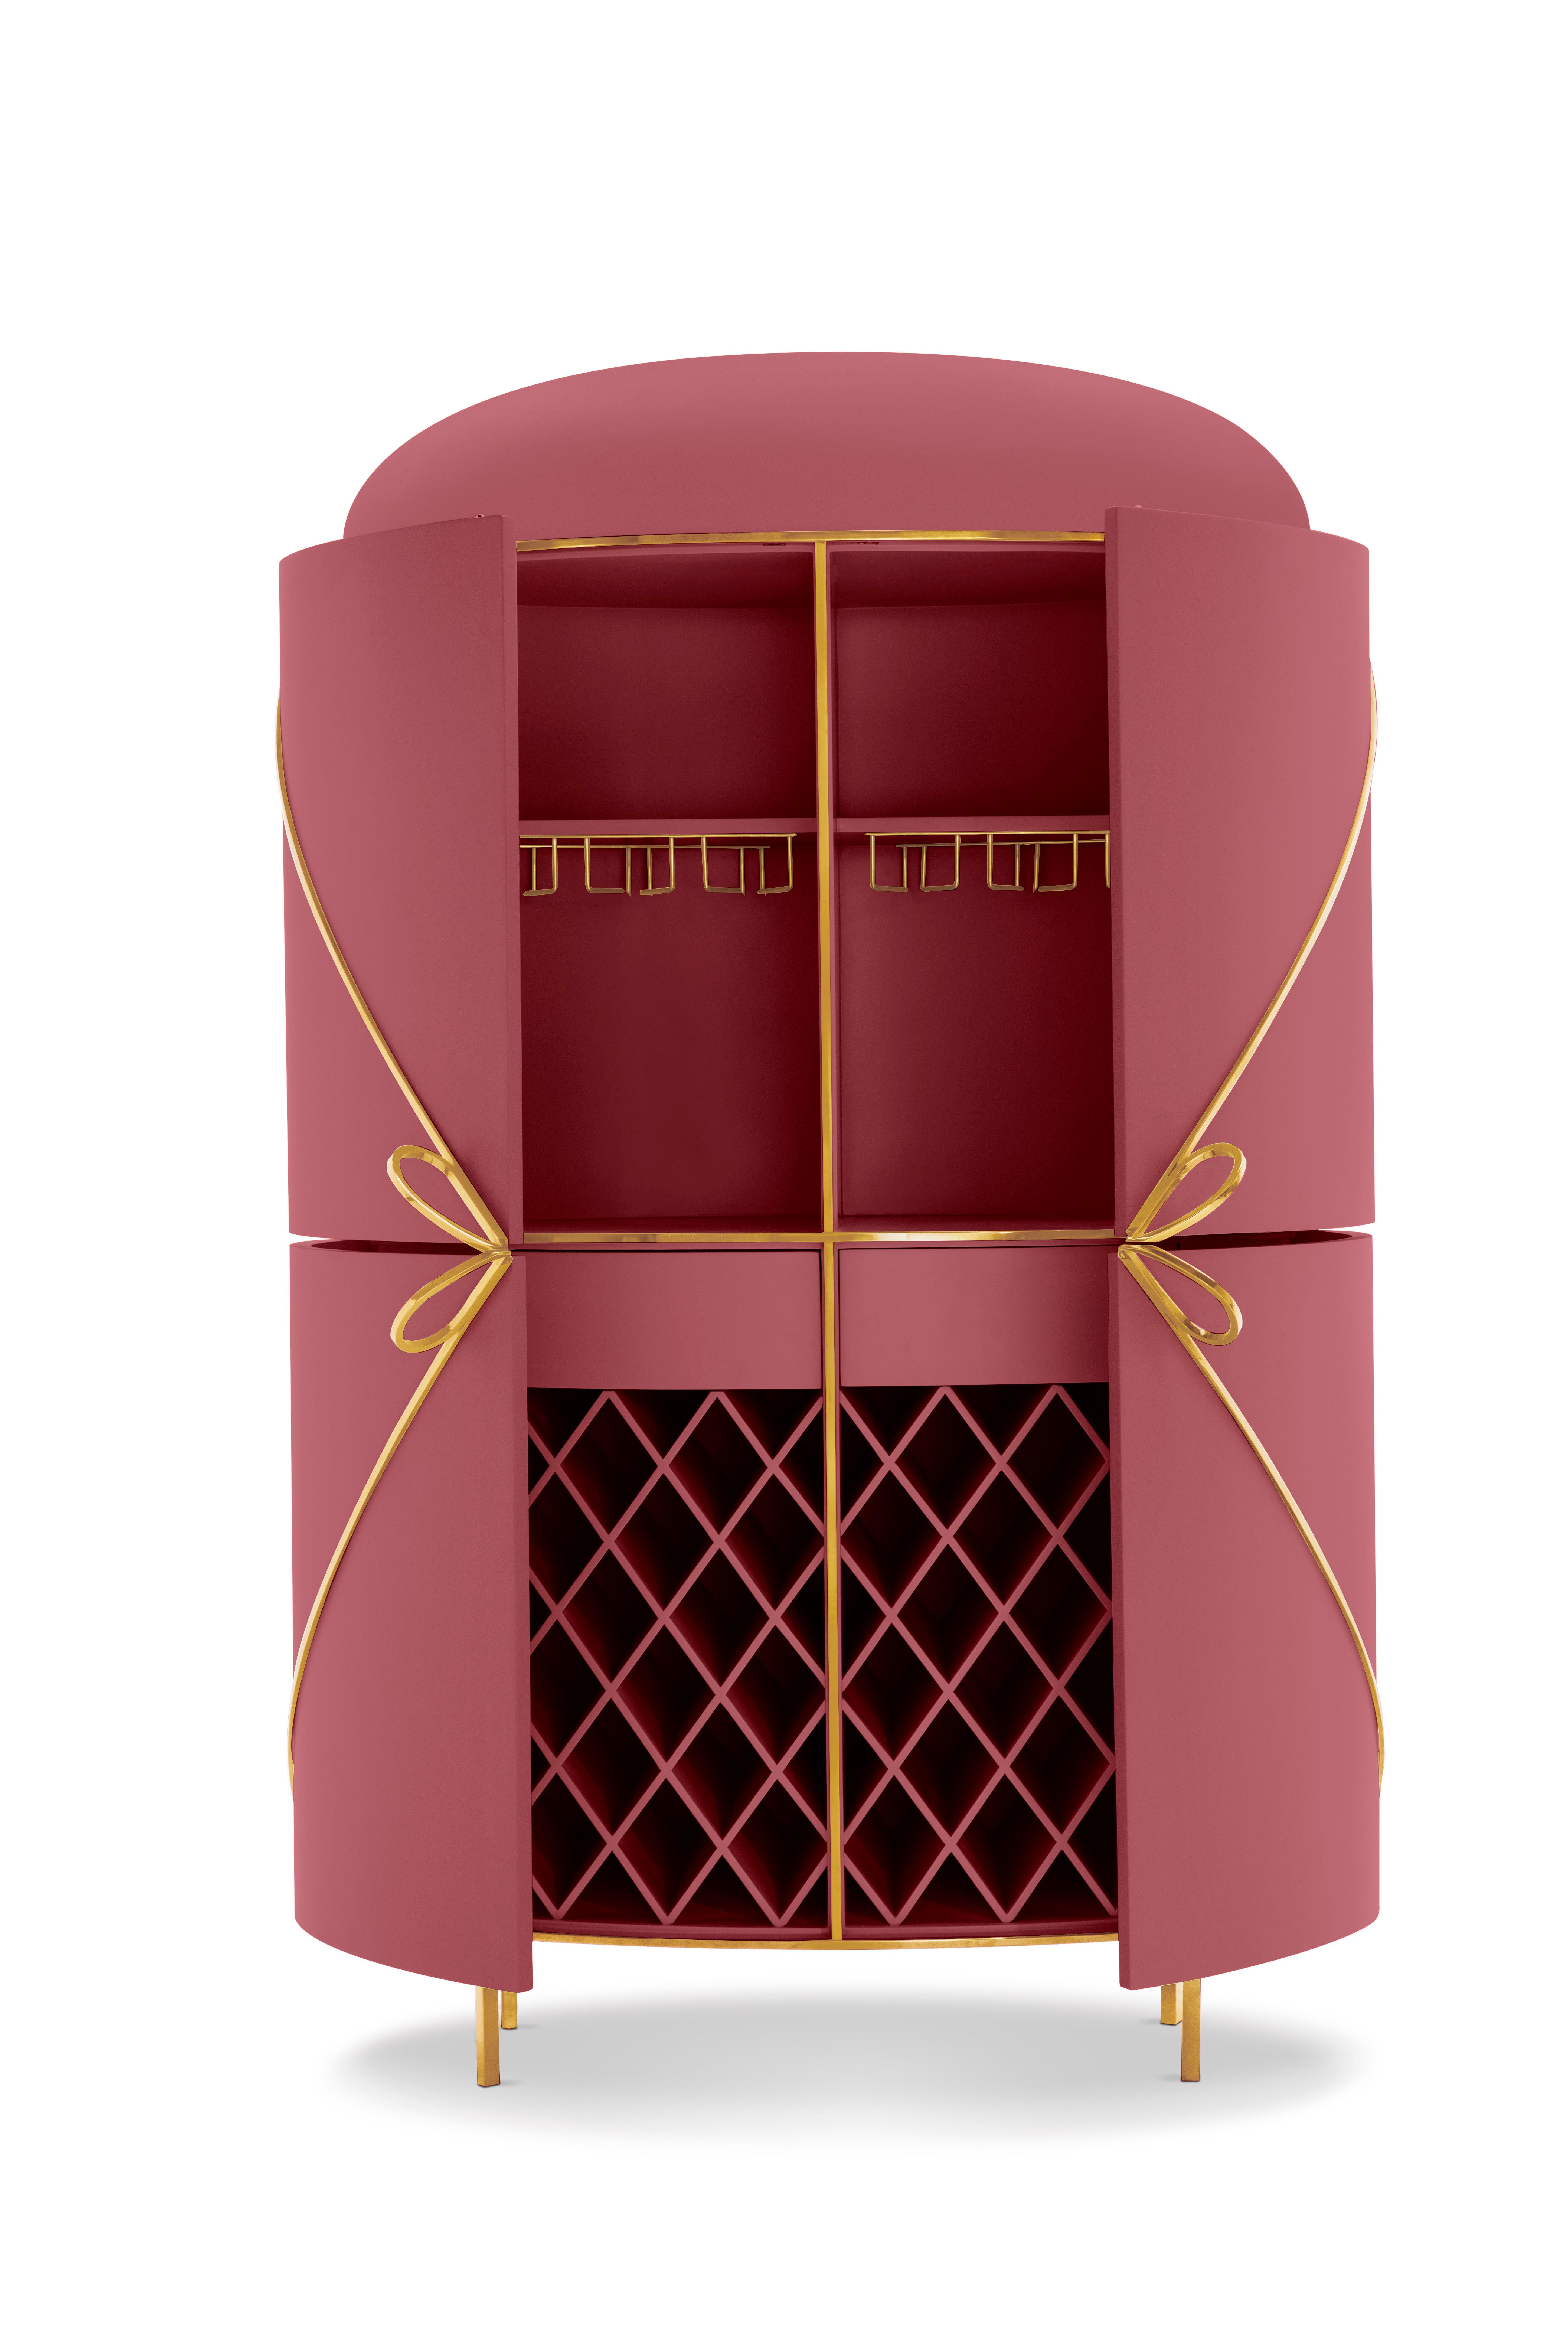 88 Secrets Rose Pink Bar Cabinet with Gold Trims by Nika Zupanc is a rose pink bar cabinet in sensuous, feminine lines with luxurious metal trims in gold. A statement piece in any interior space!

Nika Zupanc, a strikingly renowned Slovenian